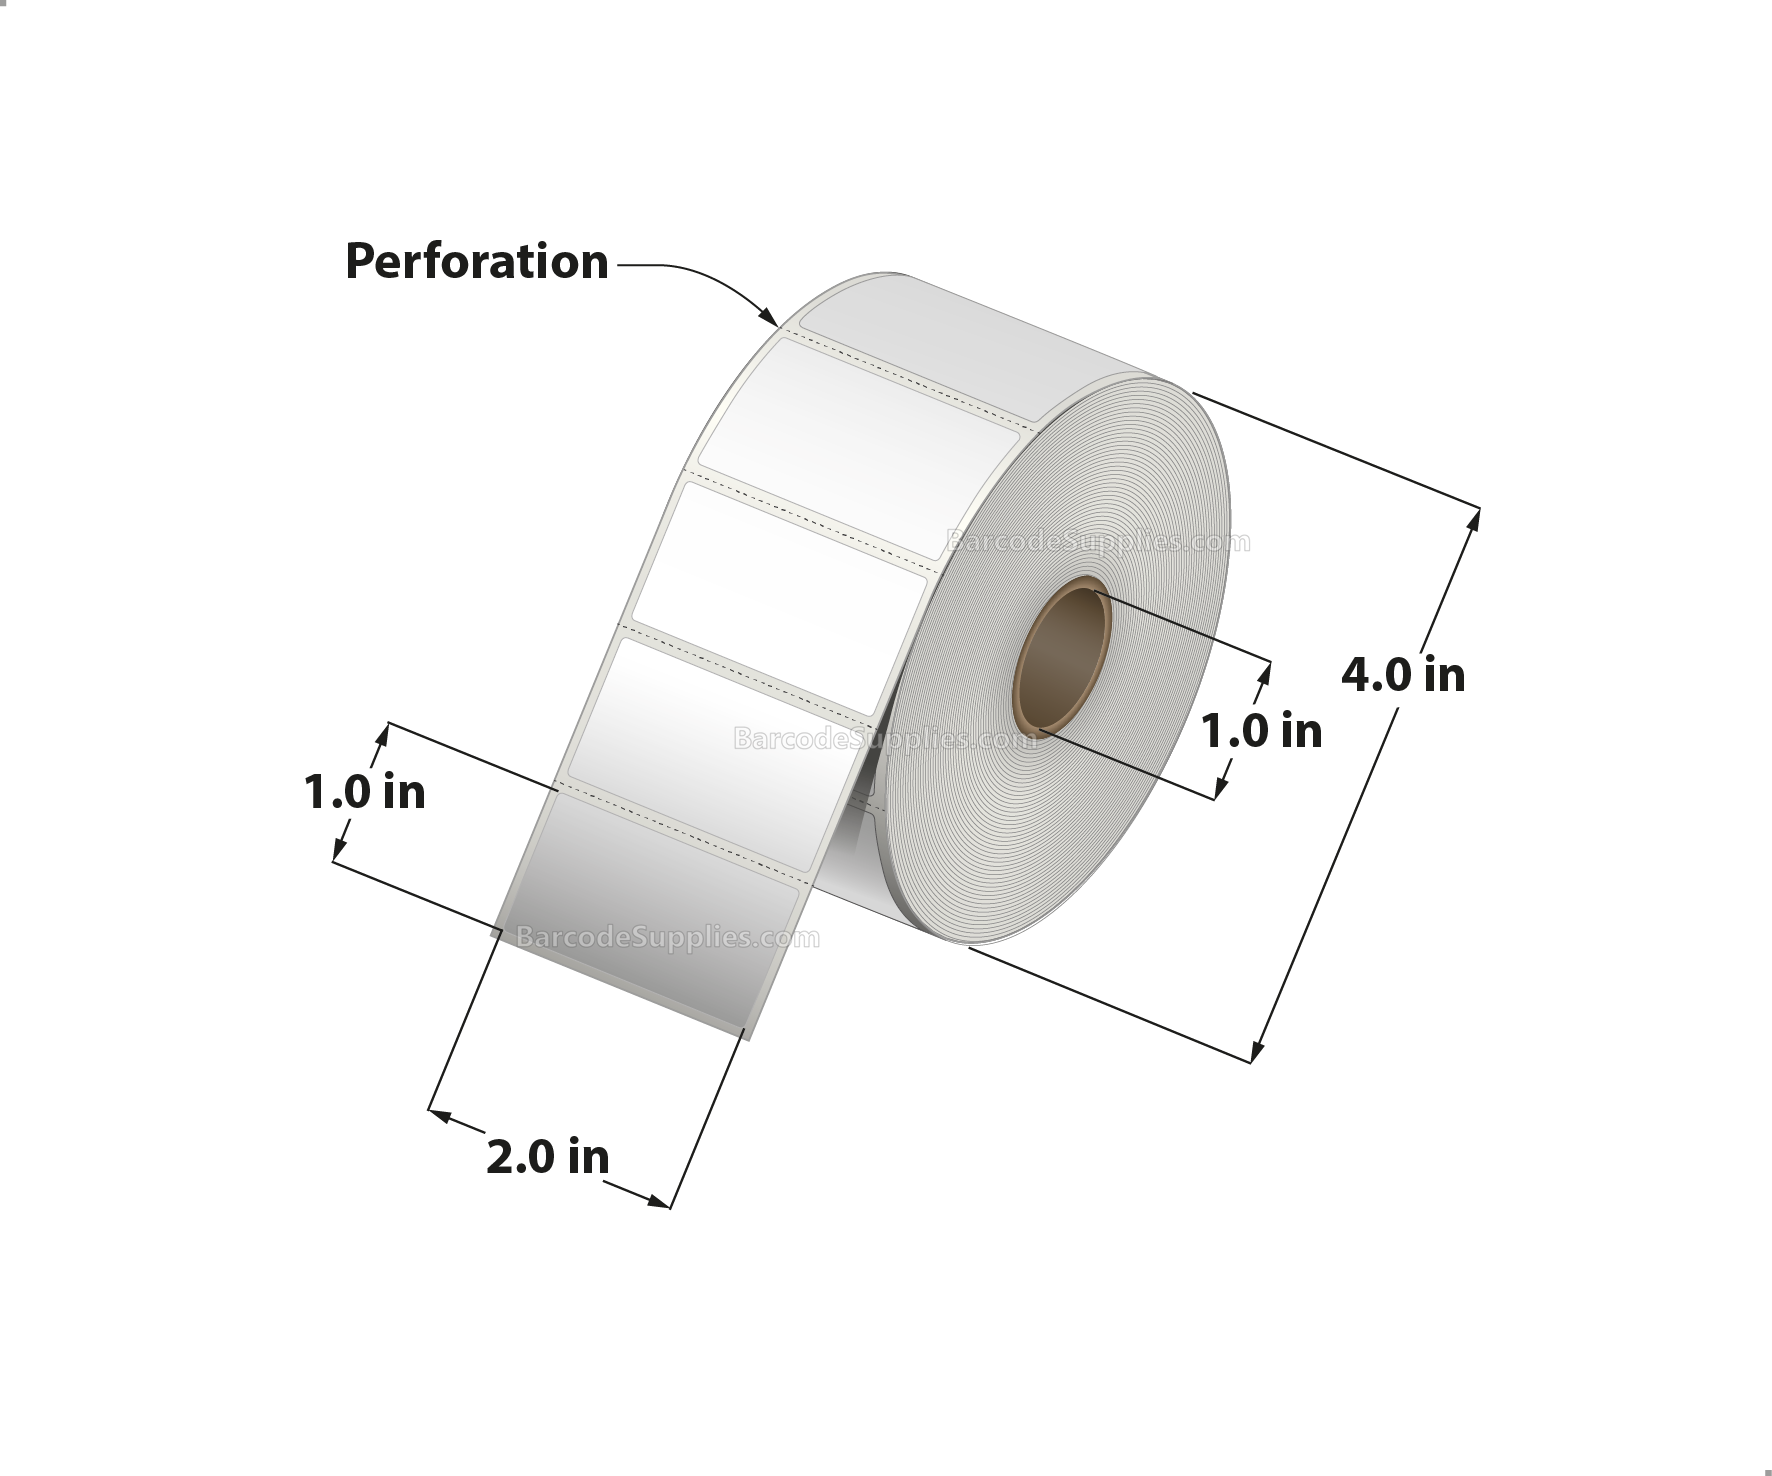 2 x 1 Direct Thermal White Labels With Permanent Acrylic Adhesive - Perforated - 1400 Labels Per Roll - Carton Of 4 Rolls - 5600 Labels Total - MPN: DT21-14PDT